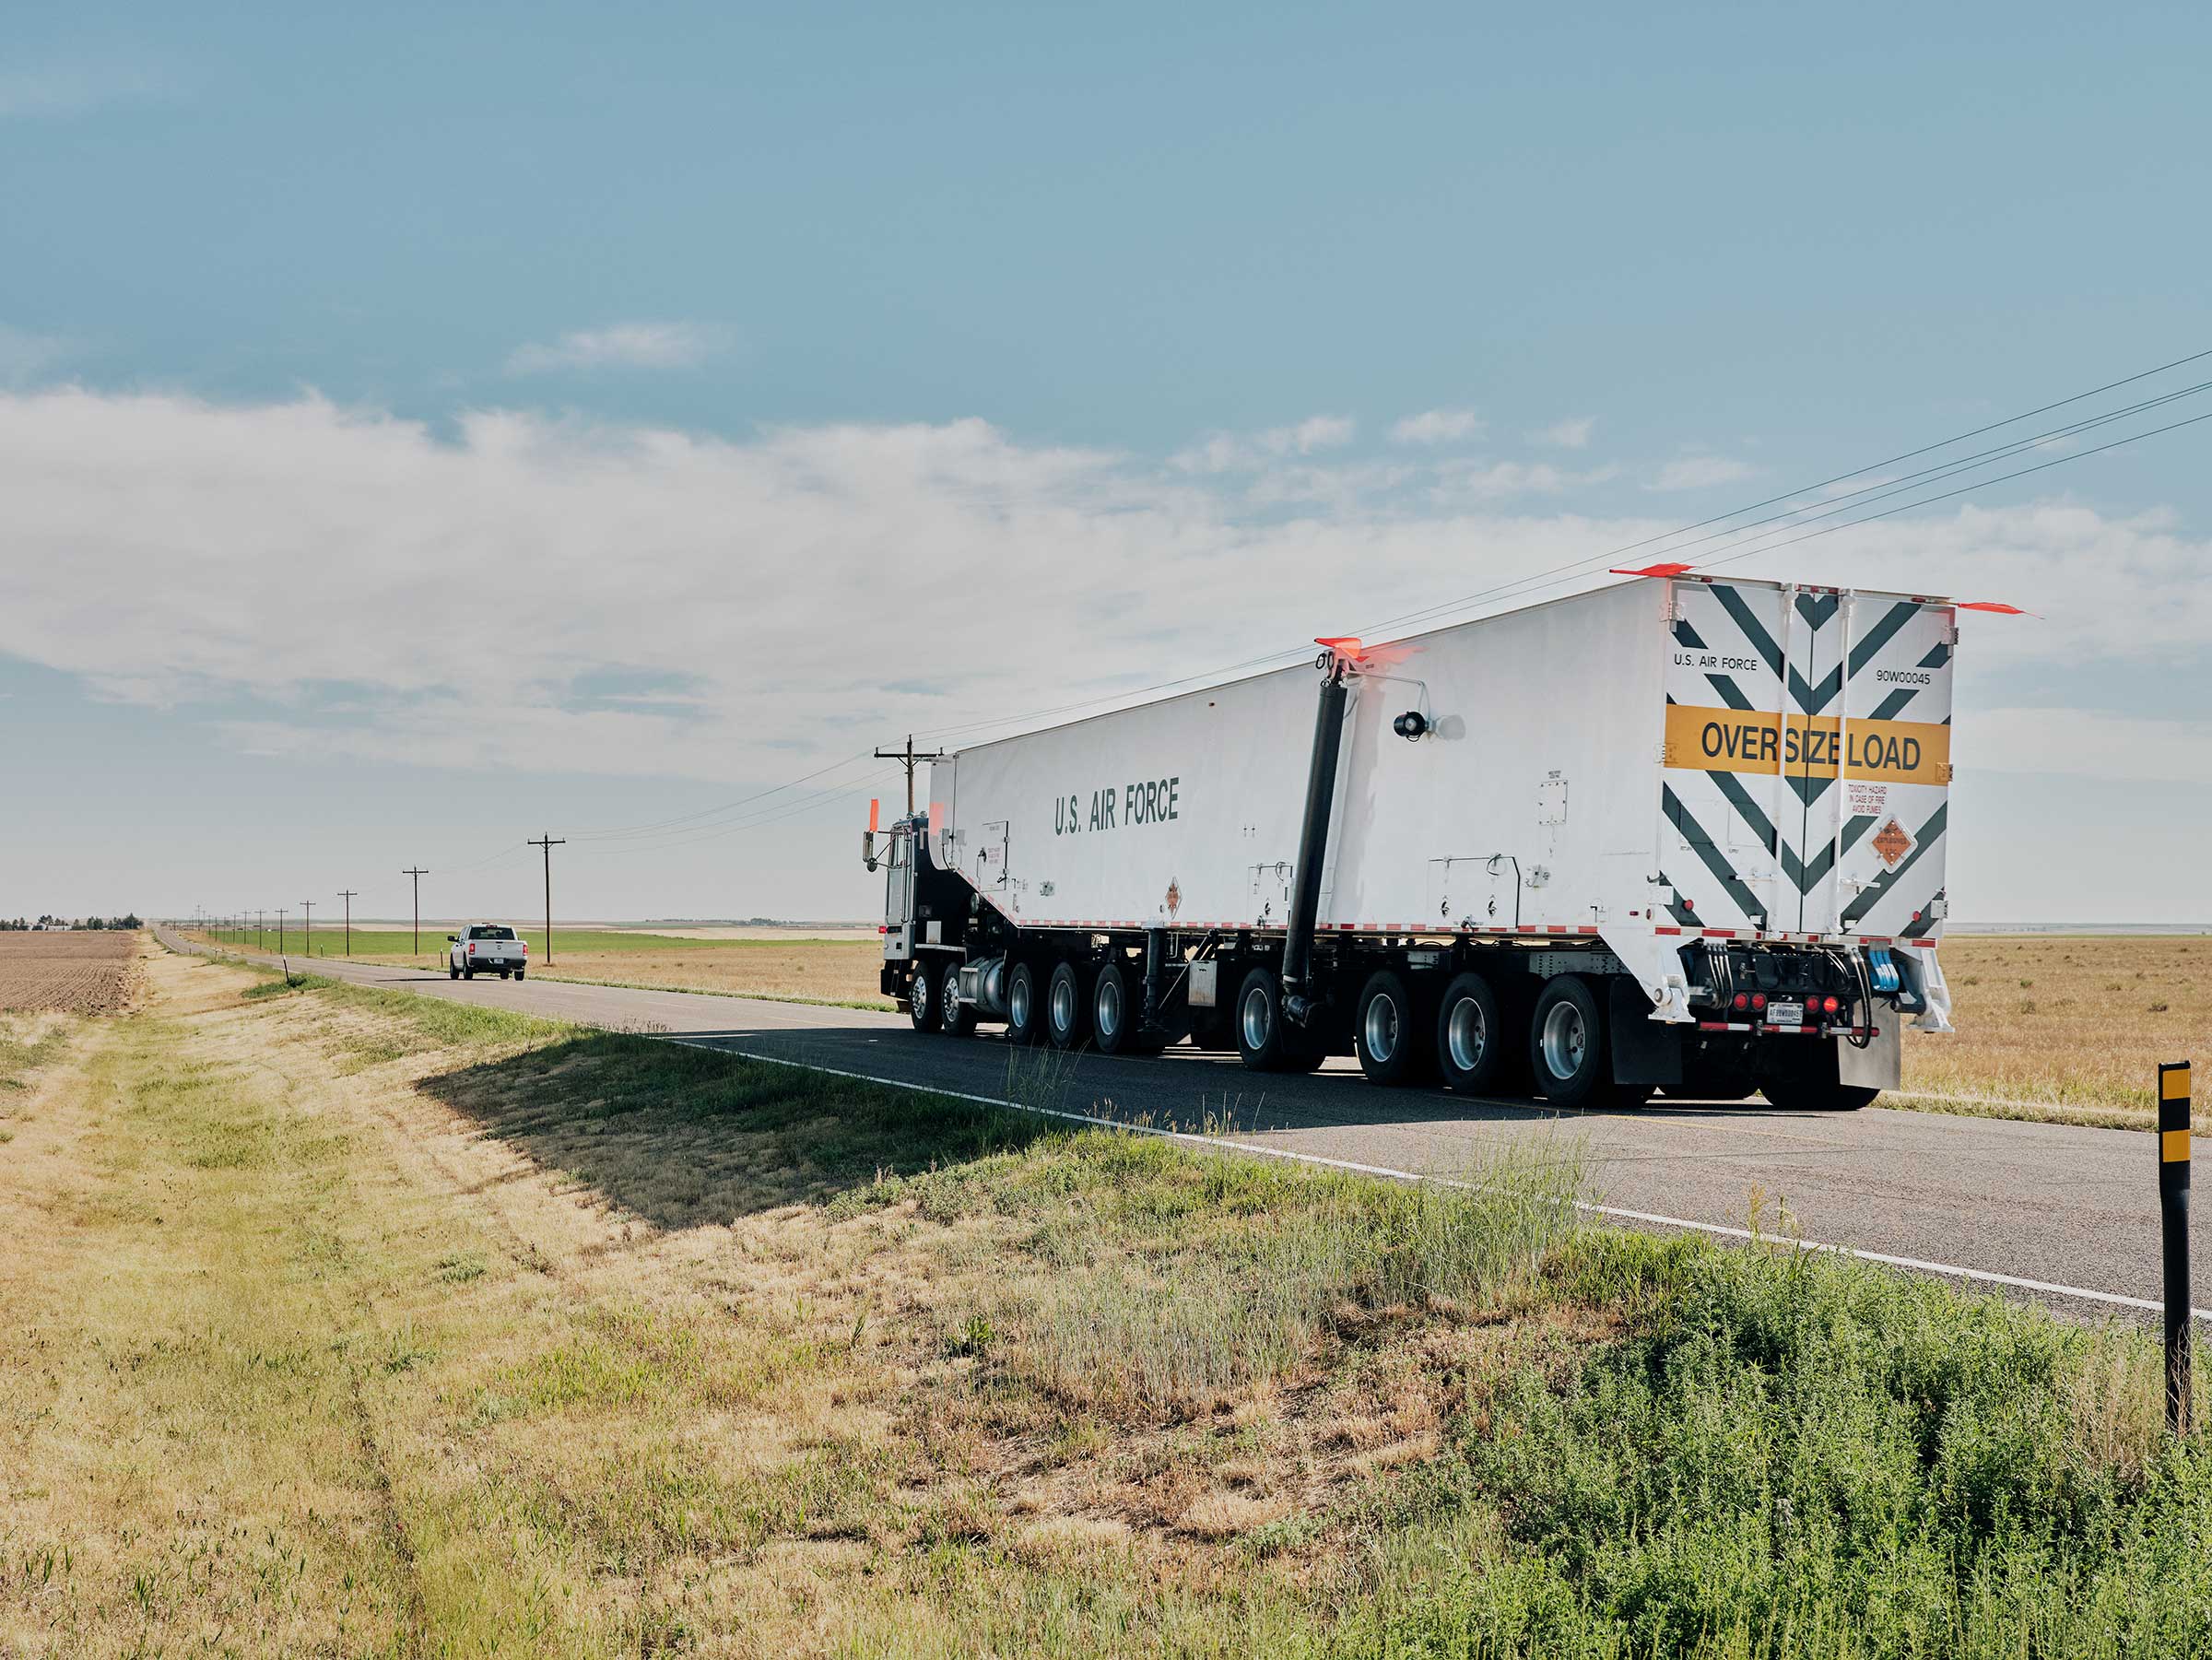 A military vehicle transports equipment on a mission to reinstall a Minuteman III at a missile silo in Pine Bluffs, Wyo. (Benjamin Rasmussen for TIME)